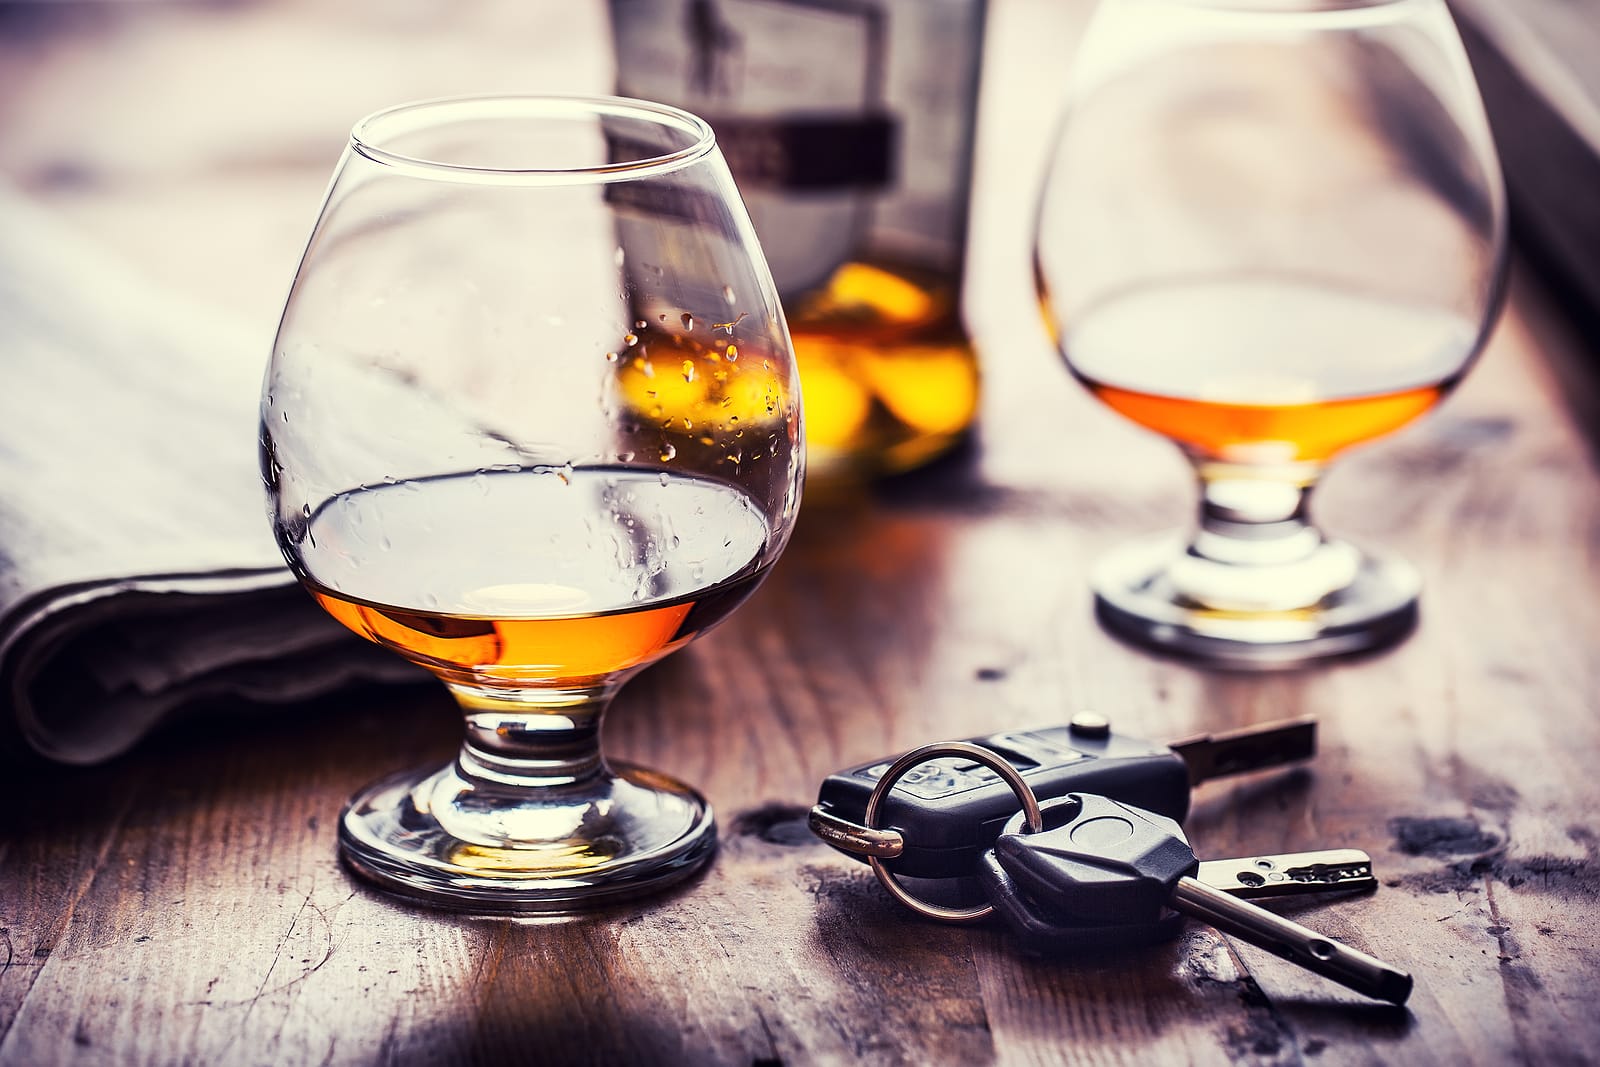 What Is the Legal Blood Alcohol Concentration (BAC) Limit for Drivers in California?